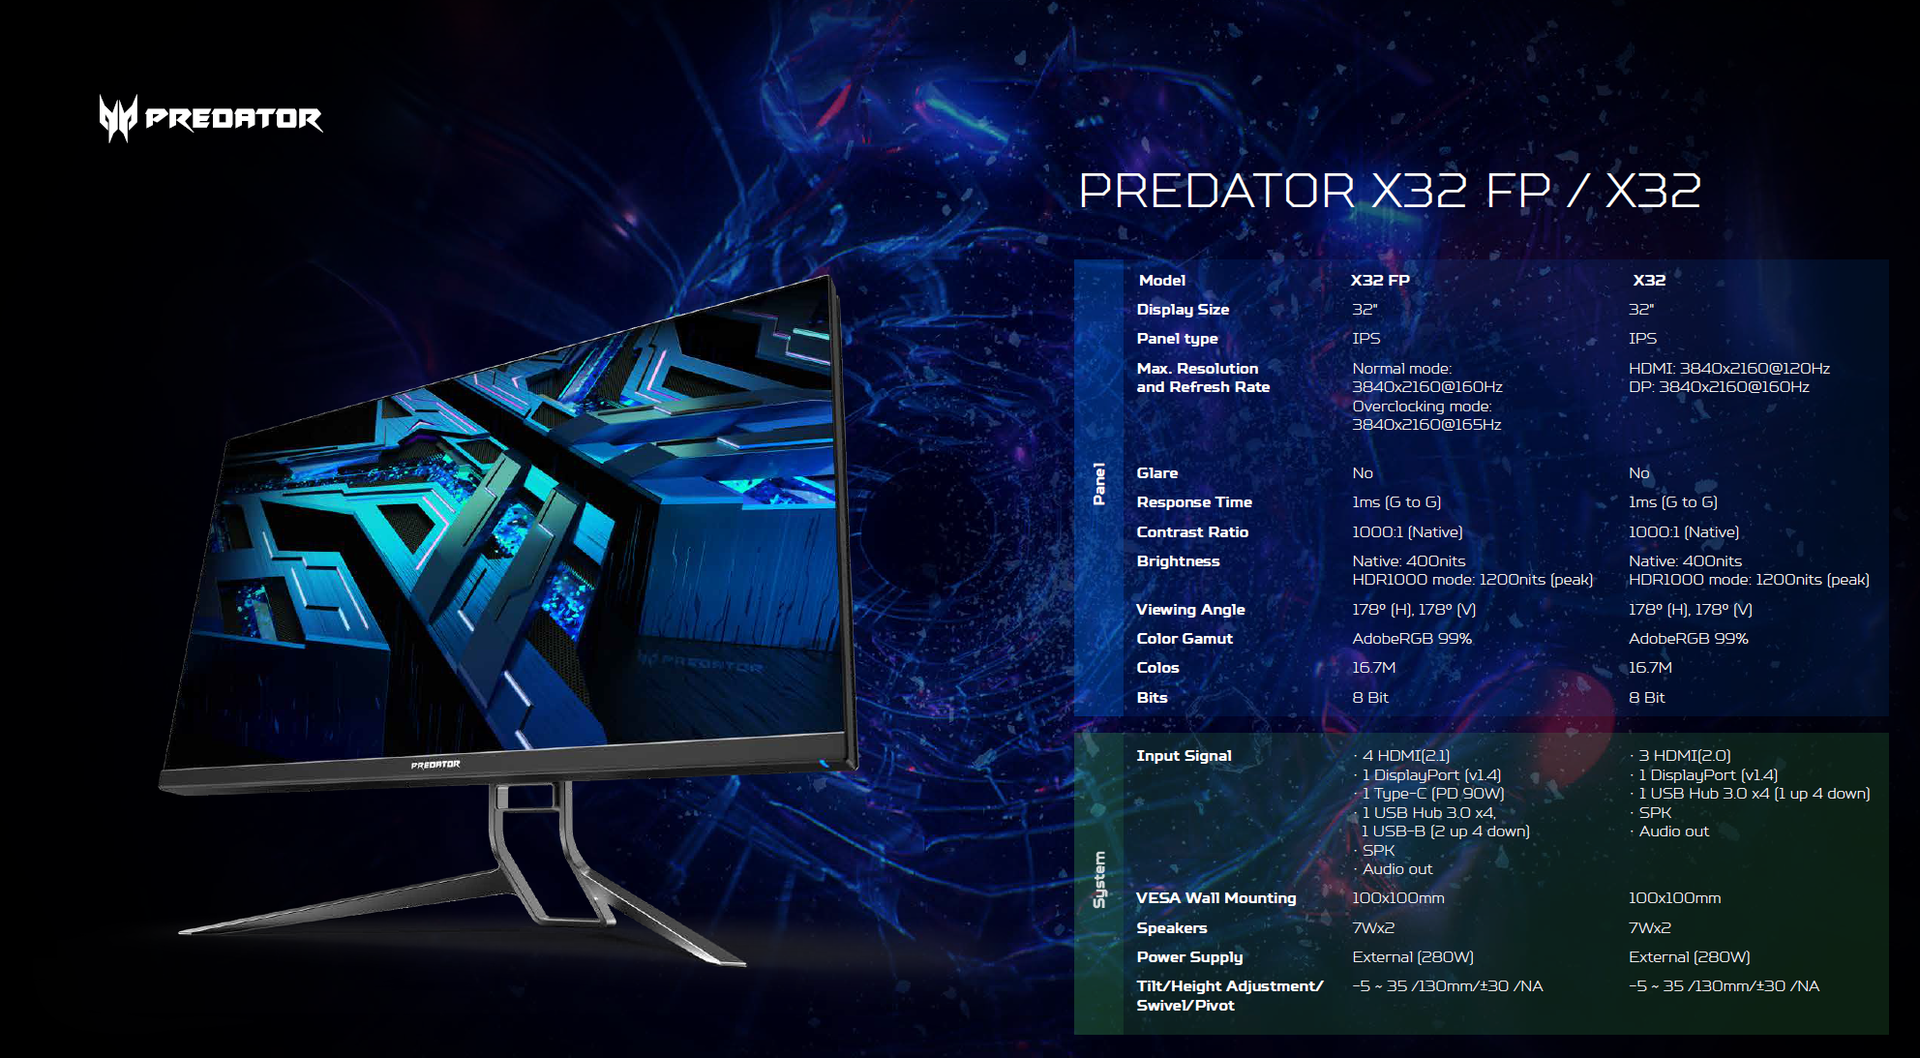 Acer Predator X32 FP content HDR LED Predator for bring creators X32 goodness 4K - gaming NotebookCheck.net 160 mini- monitors both and Hz News gamers and